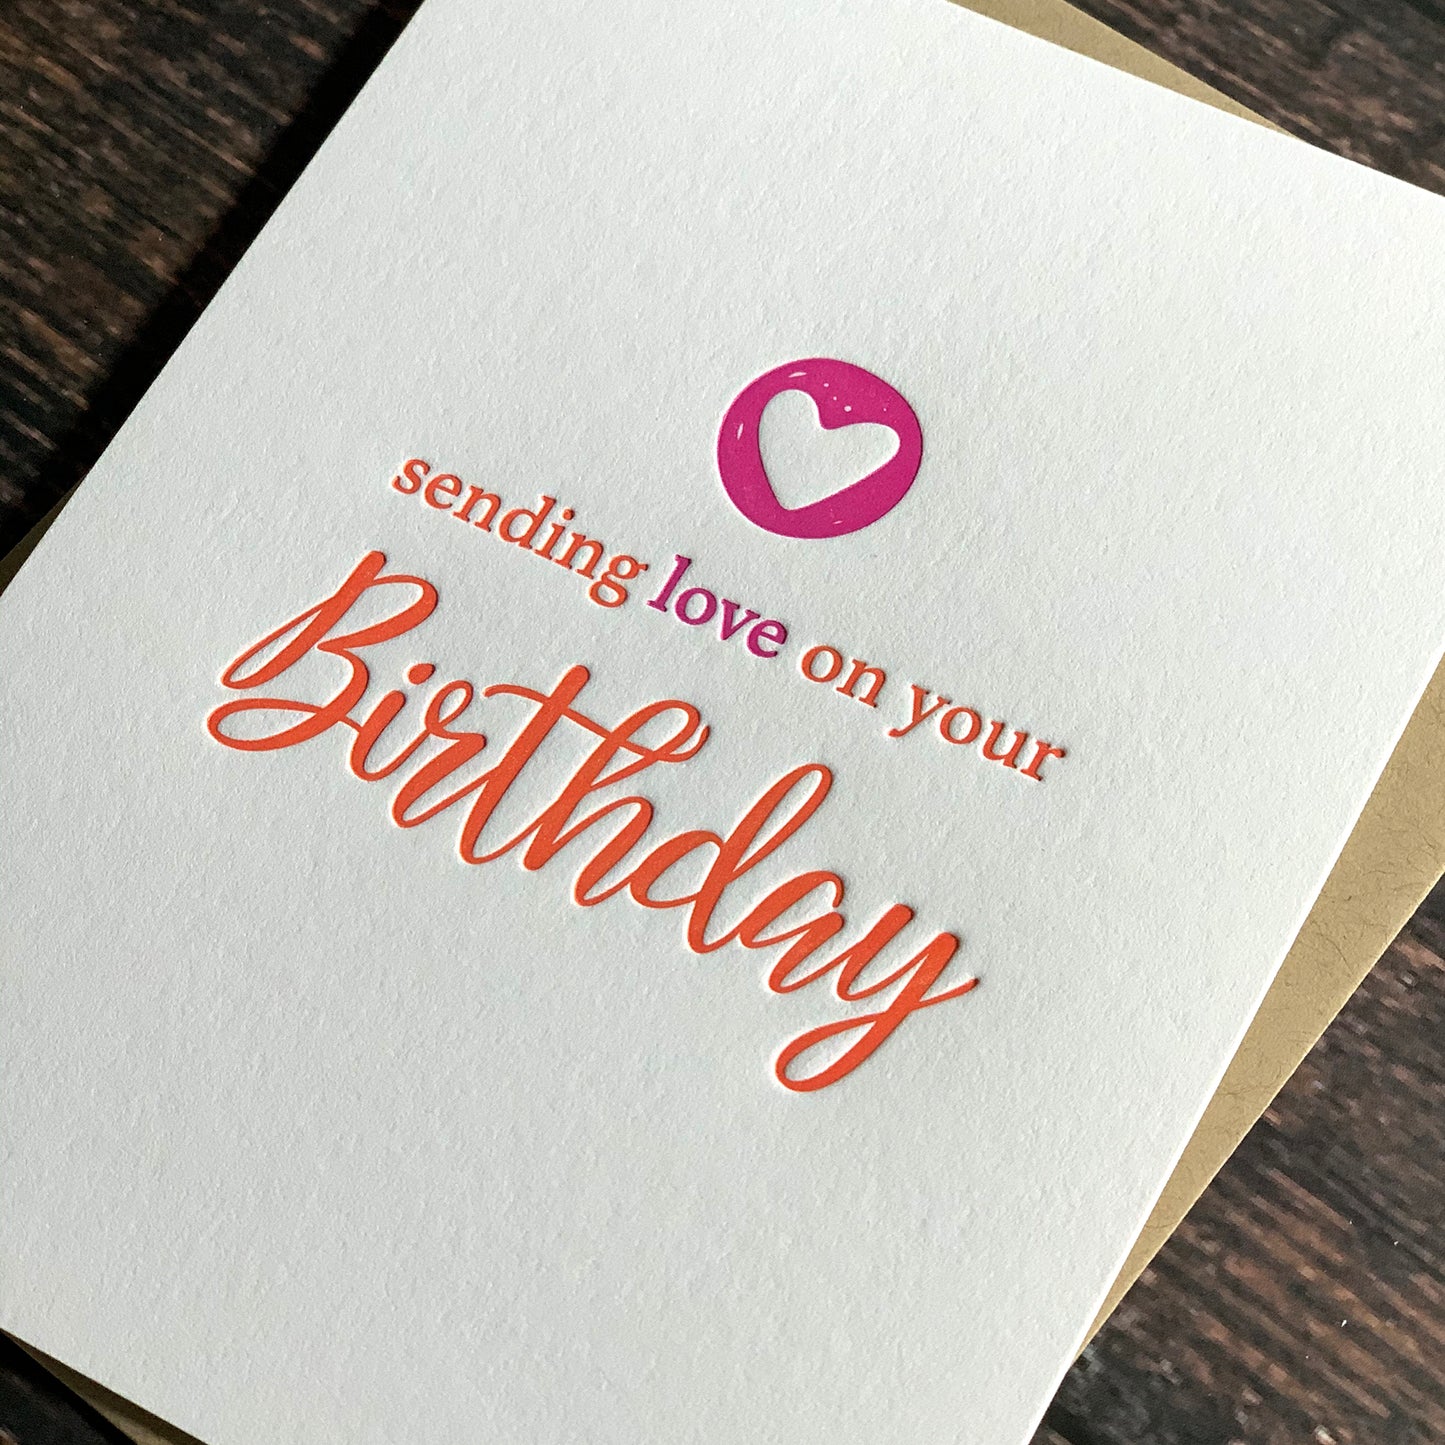 Sending love on your Birthday Card, Letterpress printed, view shows letterpress impression,  includes envelope